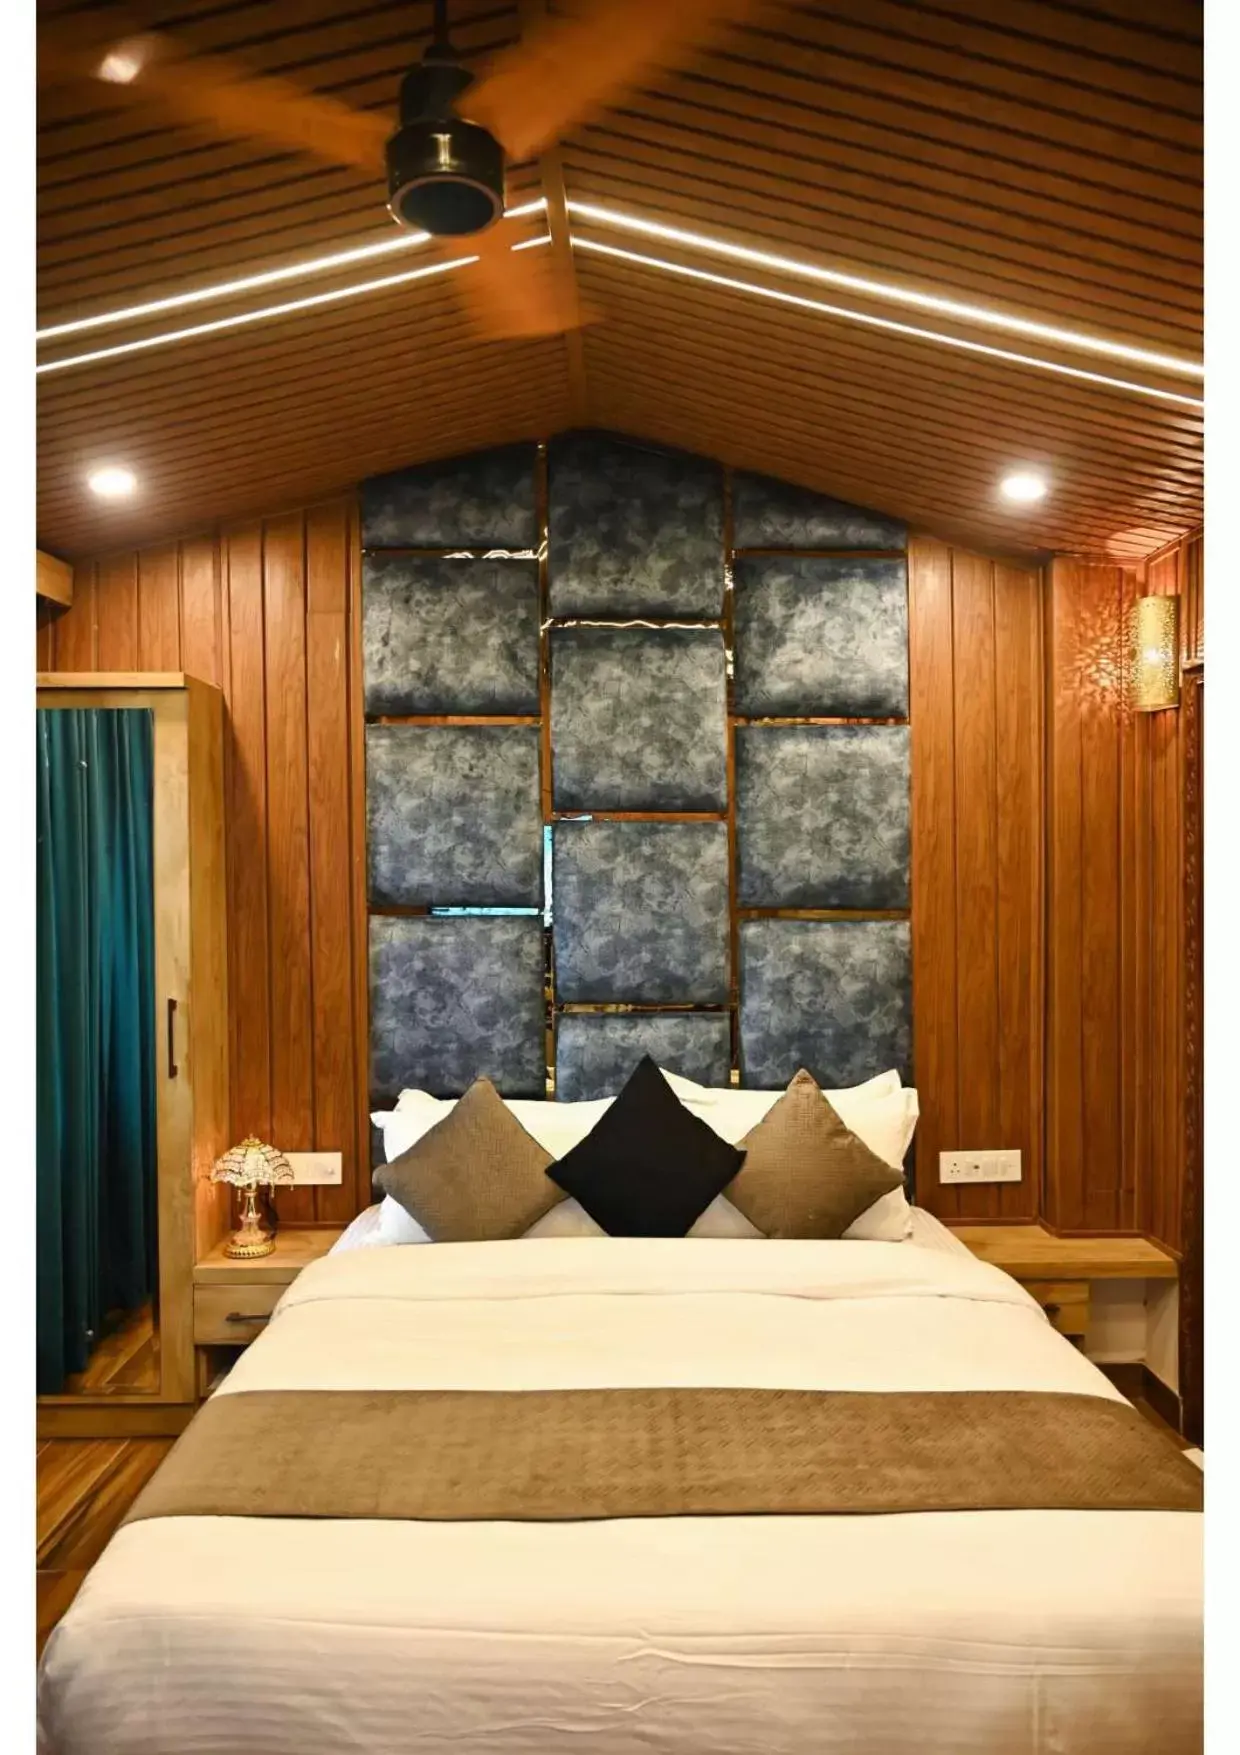 Bed in Hotel Heritage Inn at Assi Ghat